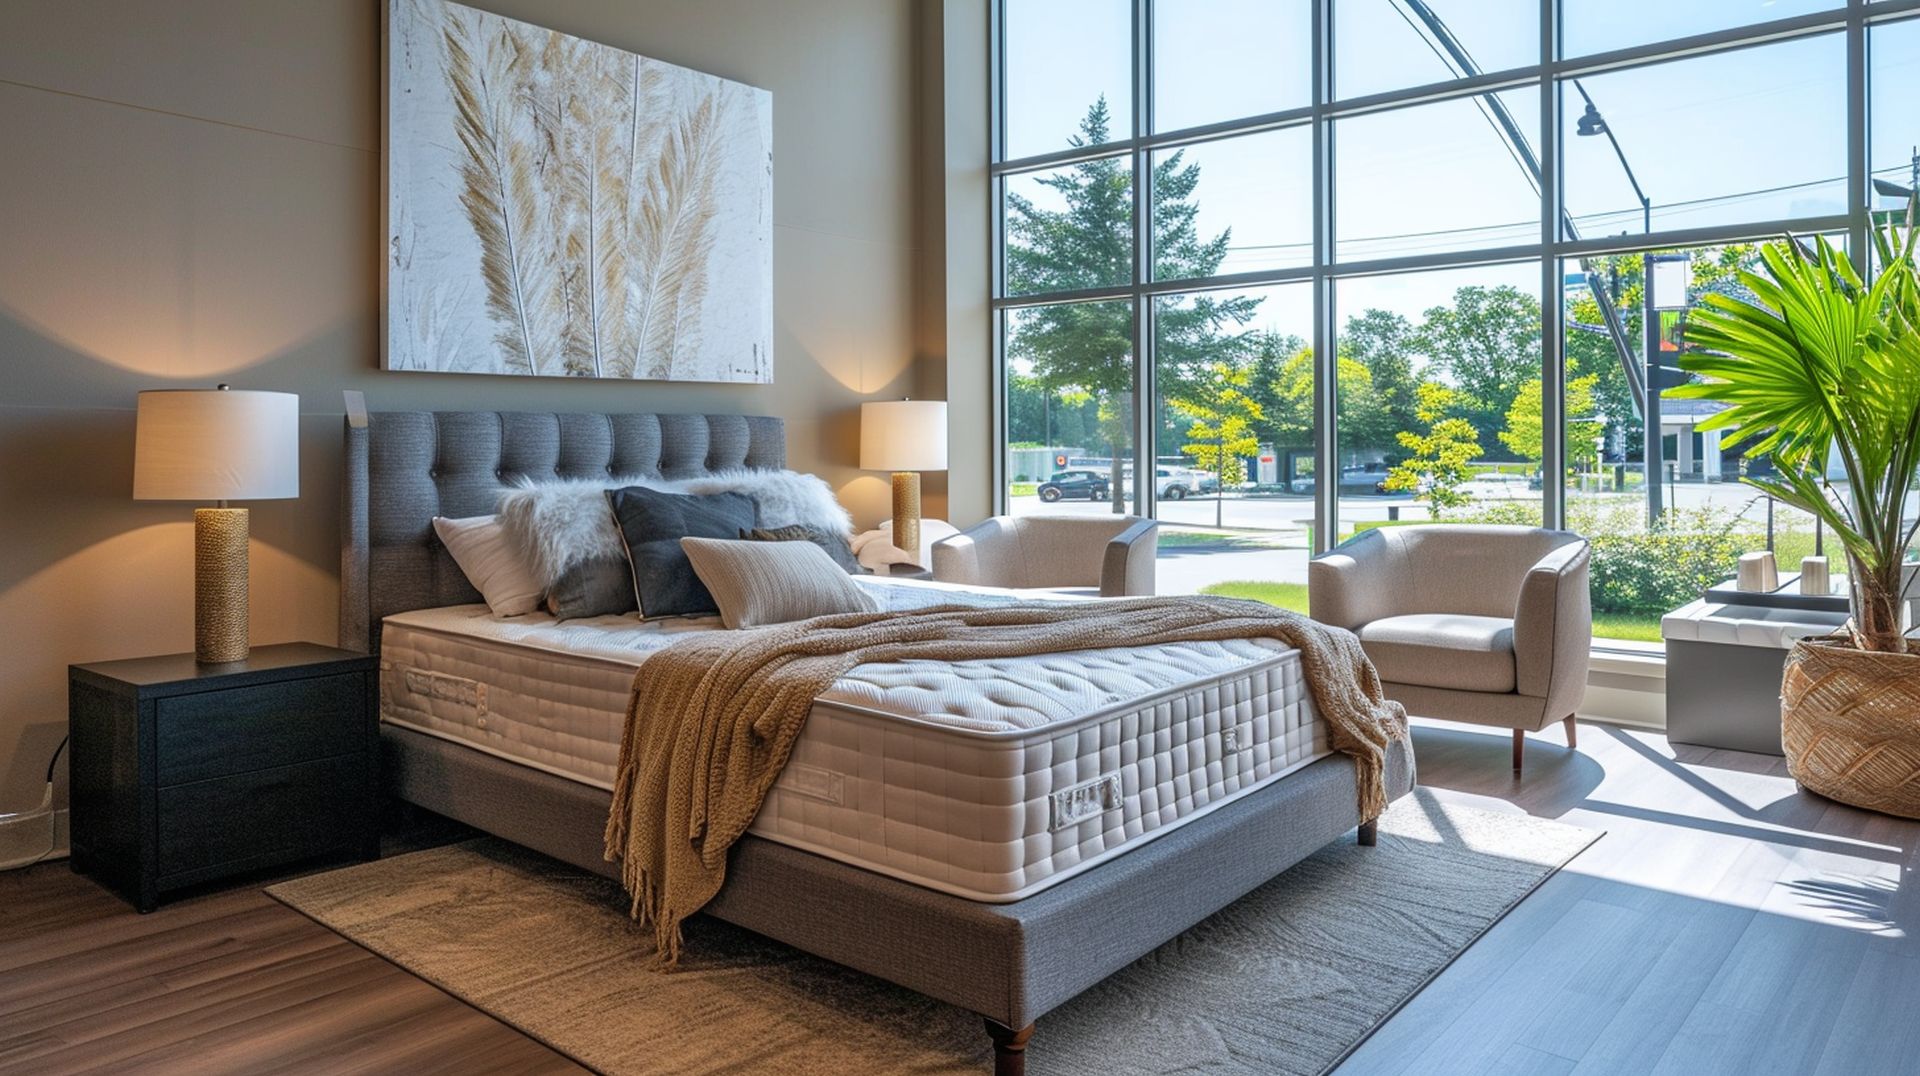 If you're looking for a new bed, mattress stores in Turlock offer the best customer and delivery service, financing, and warranties in California